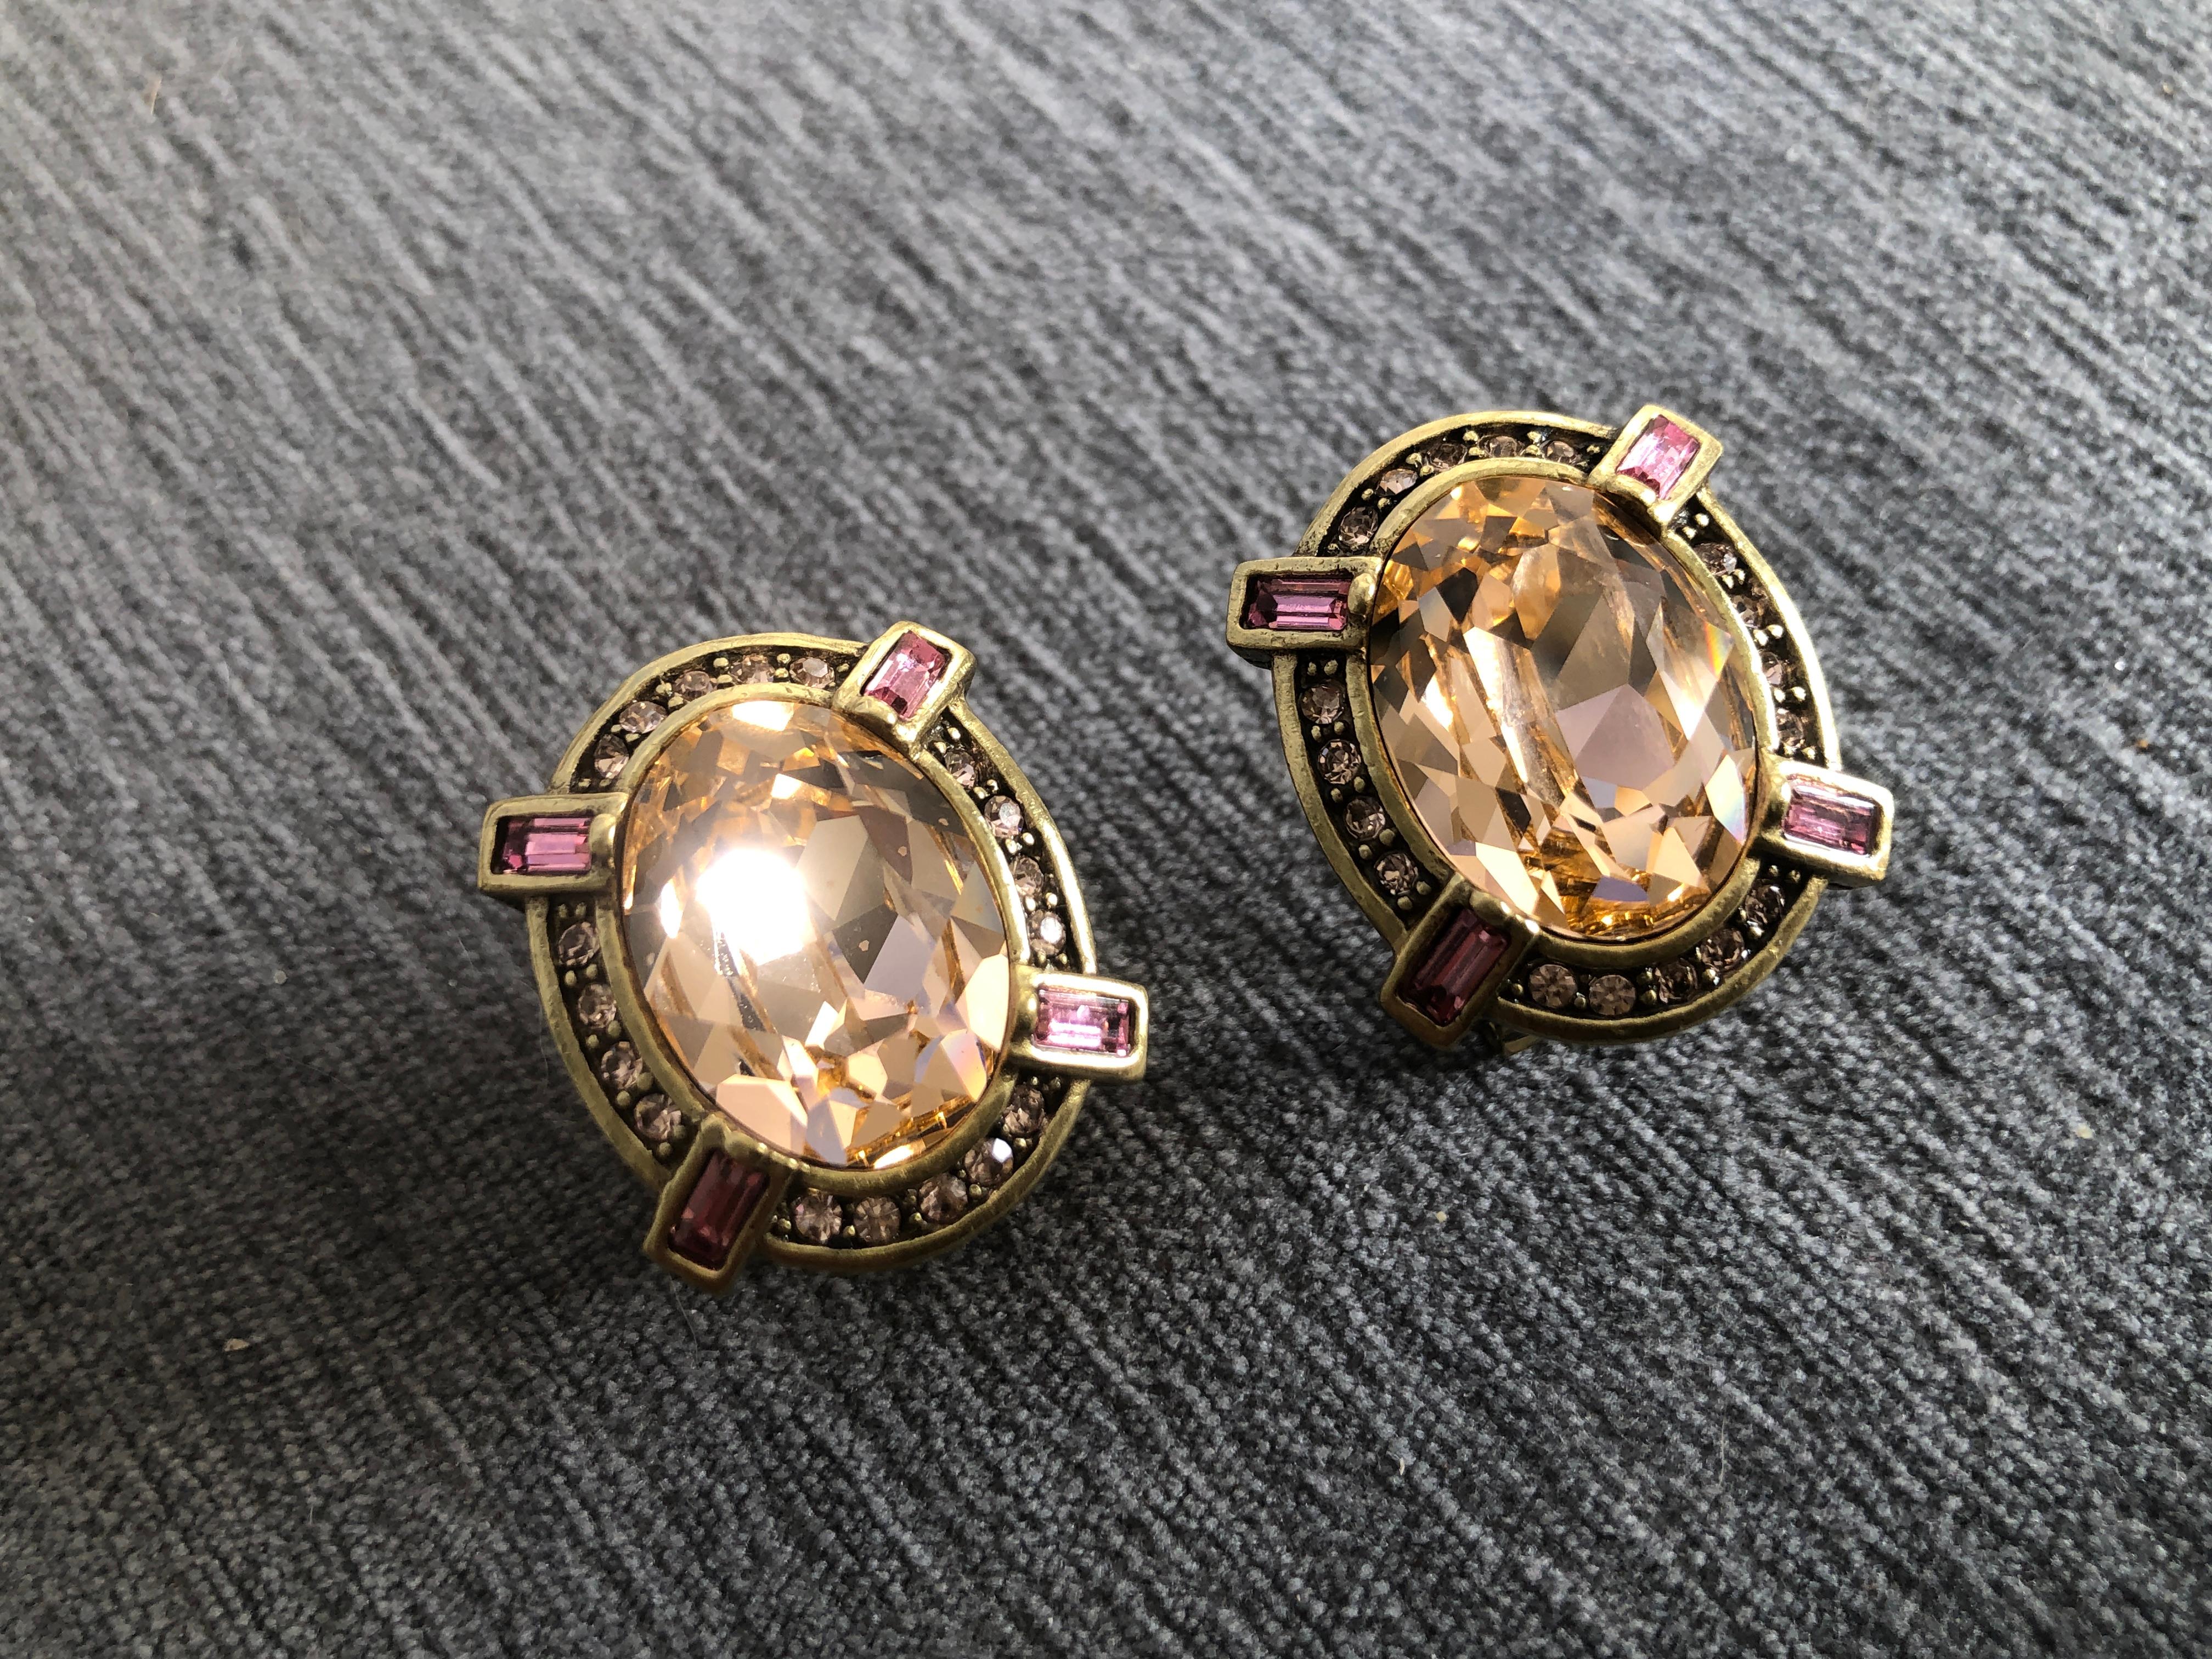 Oval Cut Art Deco Glamorous Blush & Pink Oval Crystal Earrings by Heidi Daus Lever Pieced For Sale